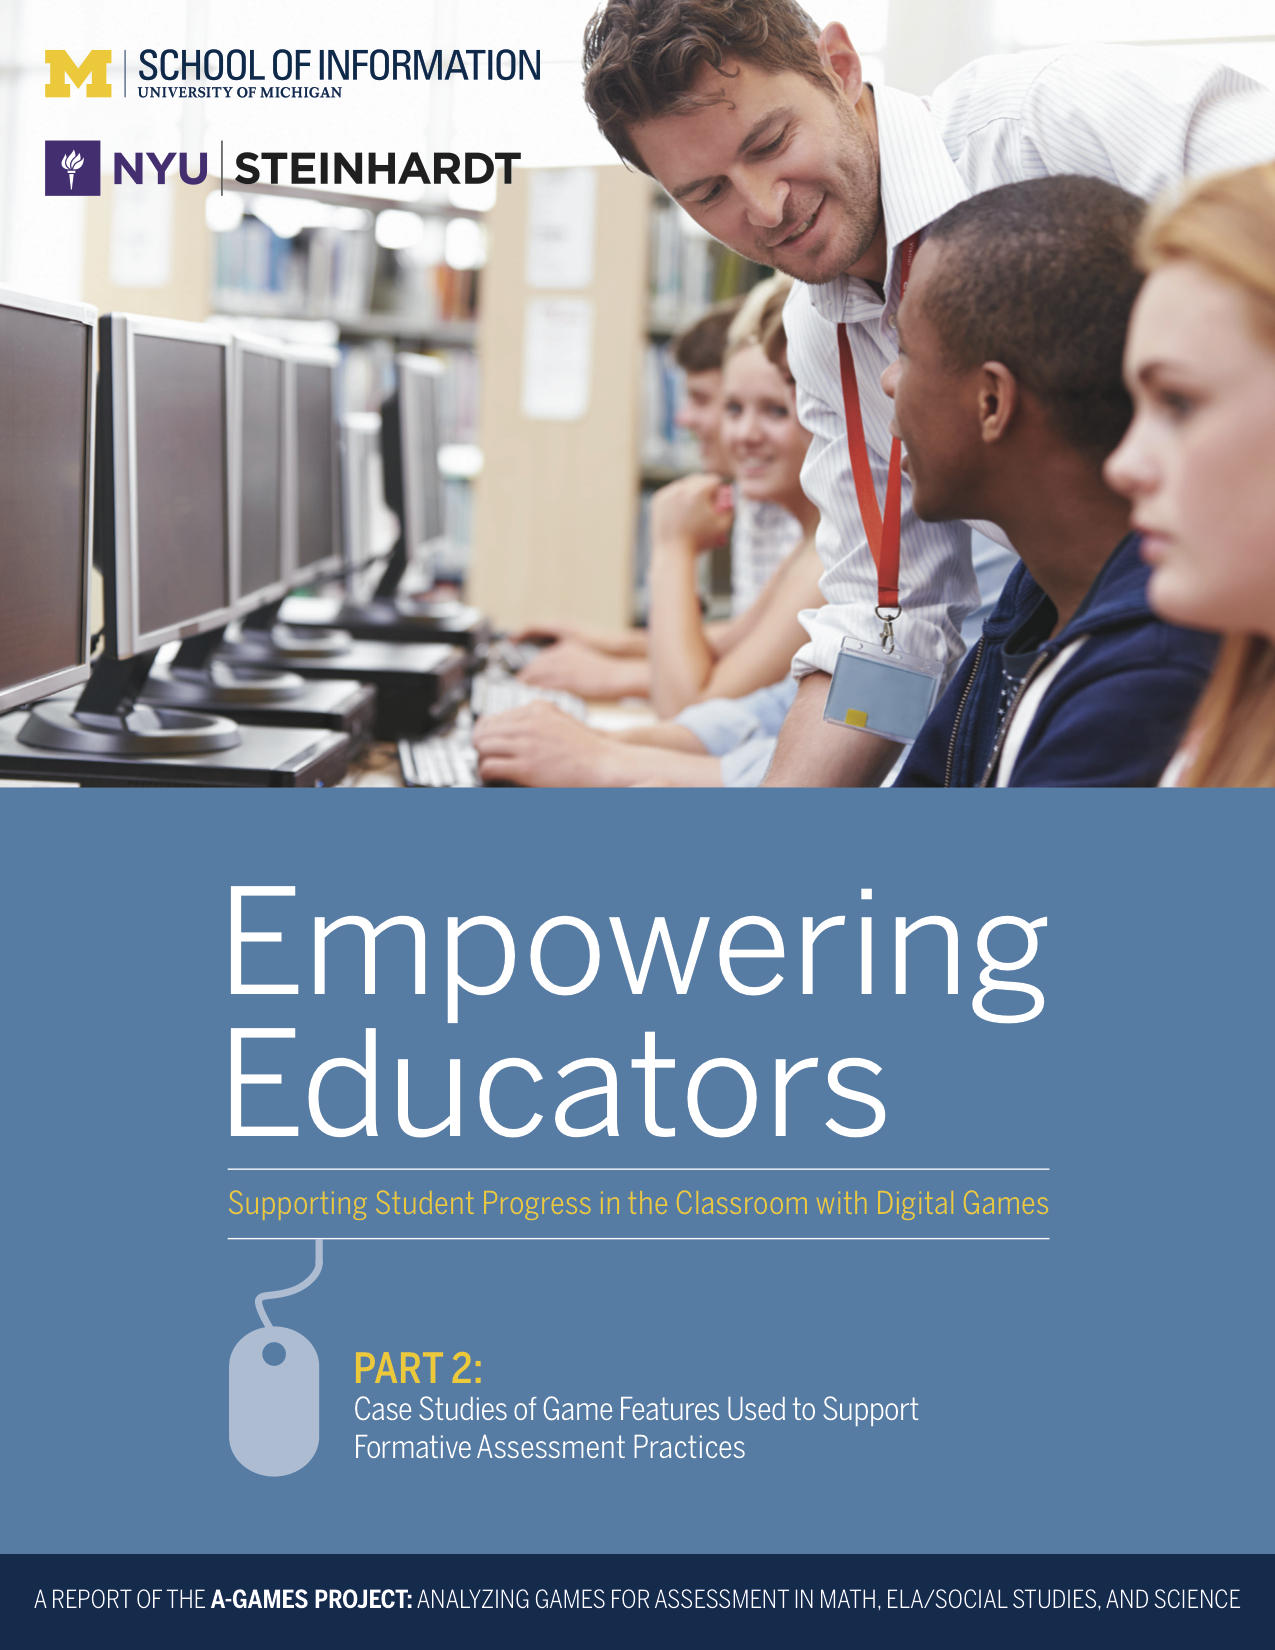 Information regarding A-Games Project on Empowering Educators part 2